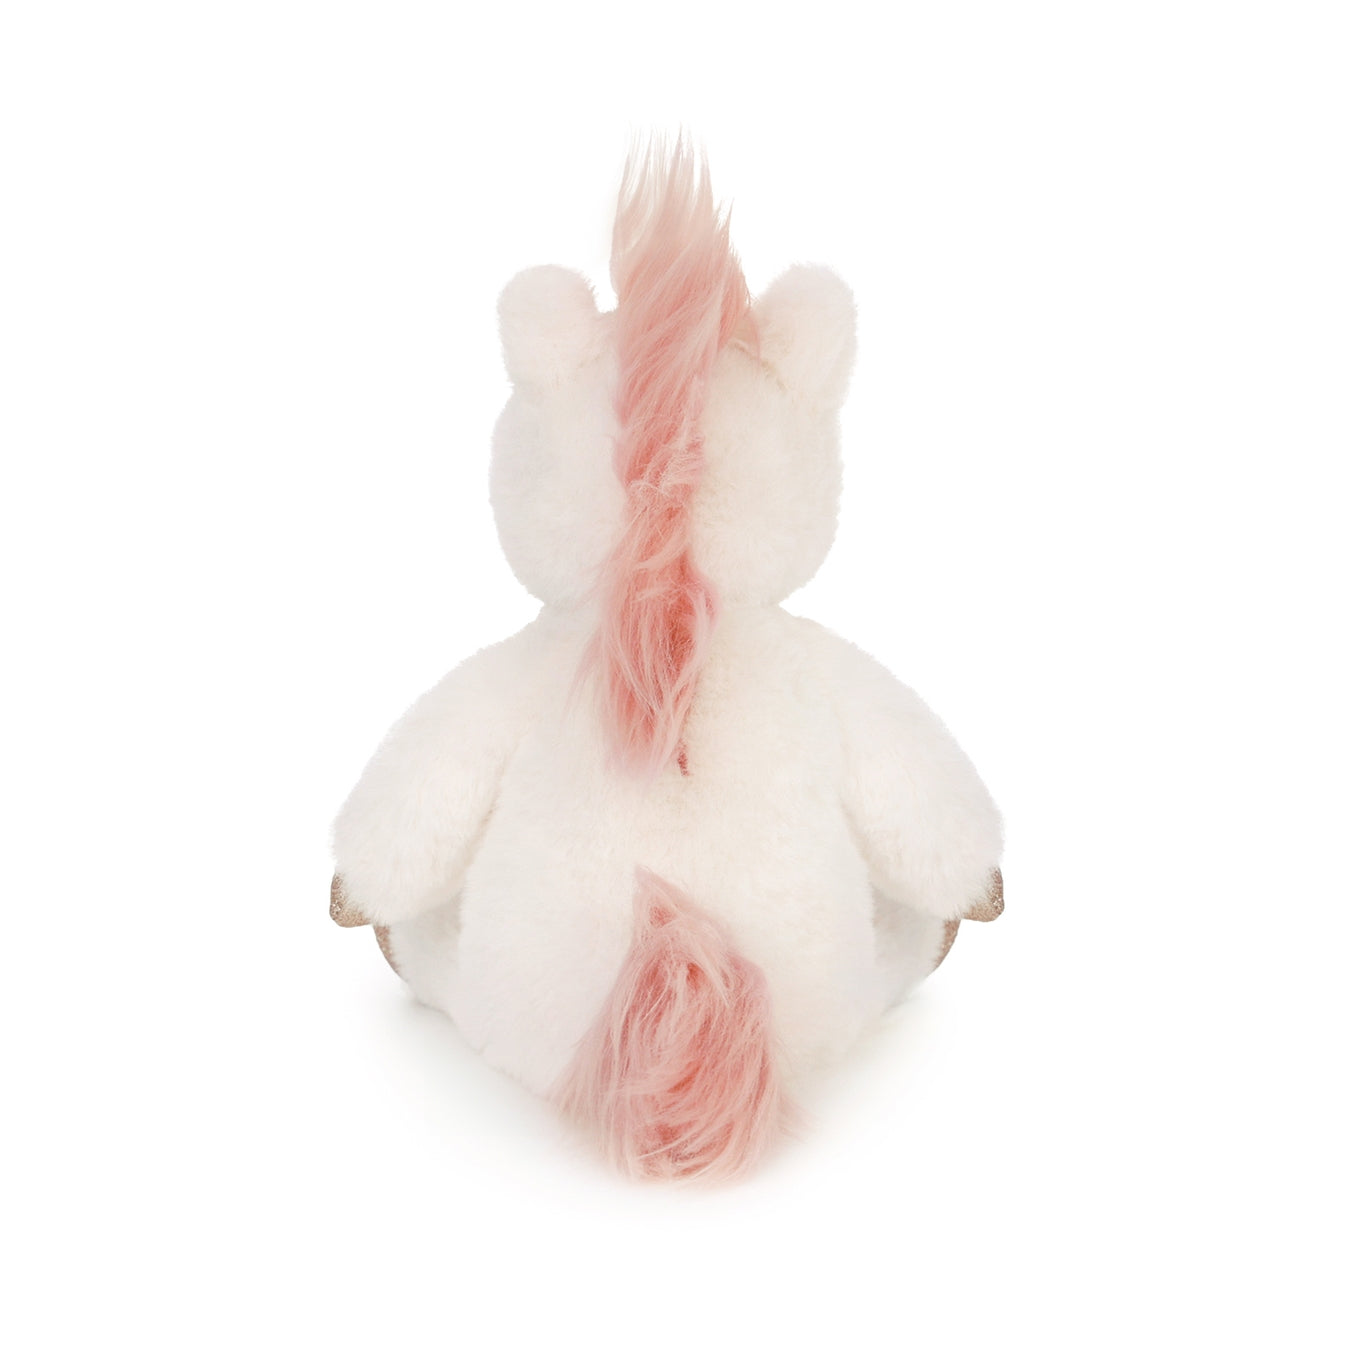 Designed by OB in Australia, these mystical toys are a great snuggly friend for your little ones and their adventures. OB Designs is passionate about design and use a combination of master craftsmen and high-quality materials to create their collection.